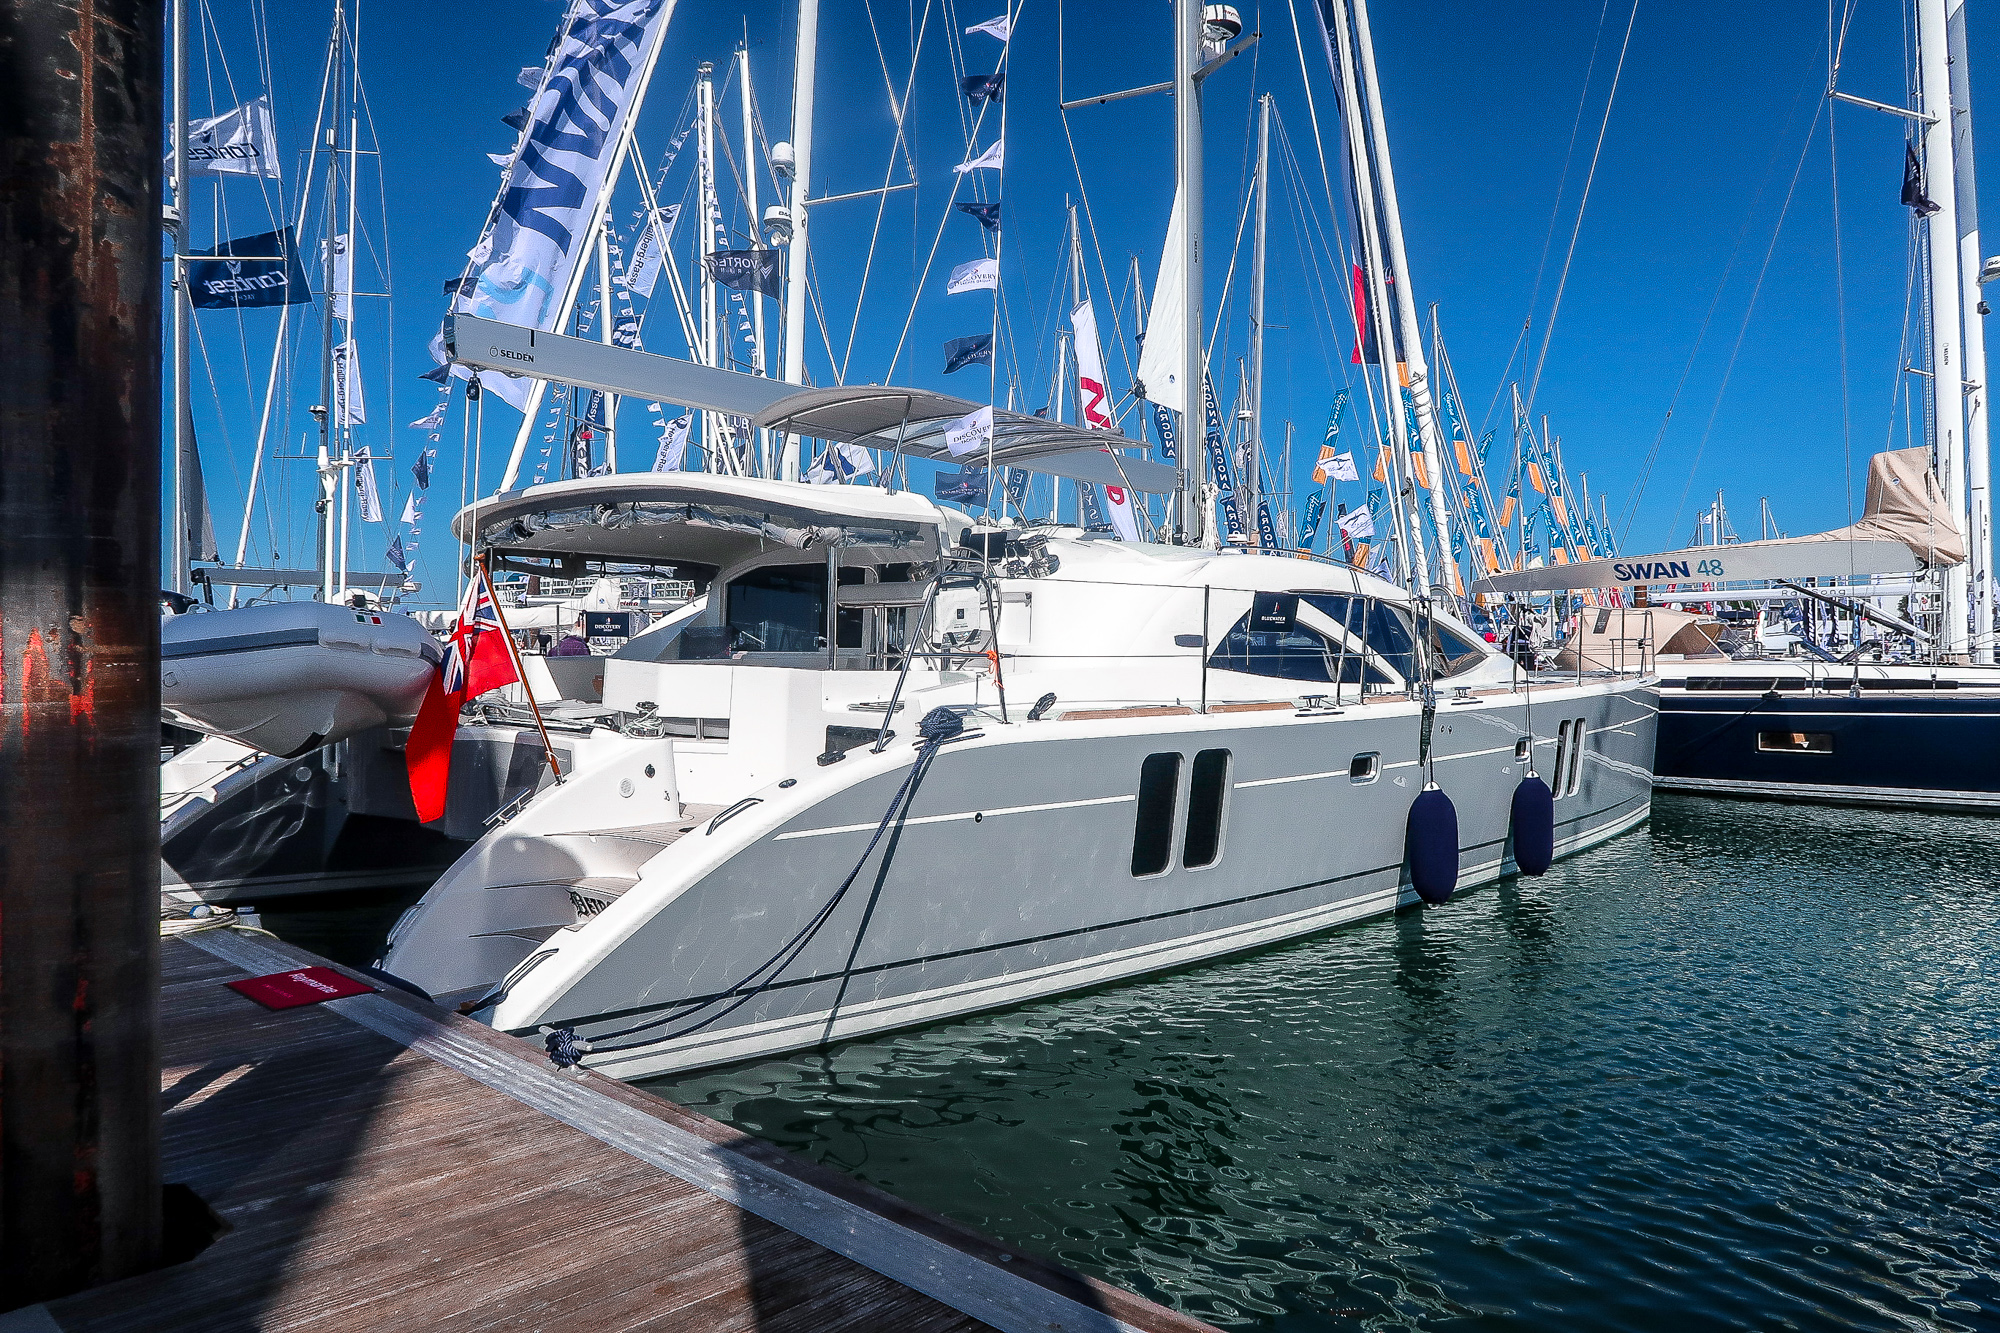 Southampton Boat Show: How To Get Discounted Tickets 26